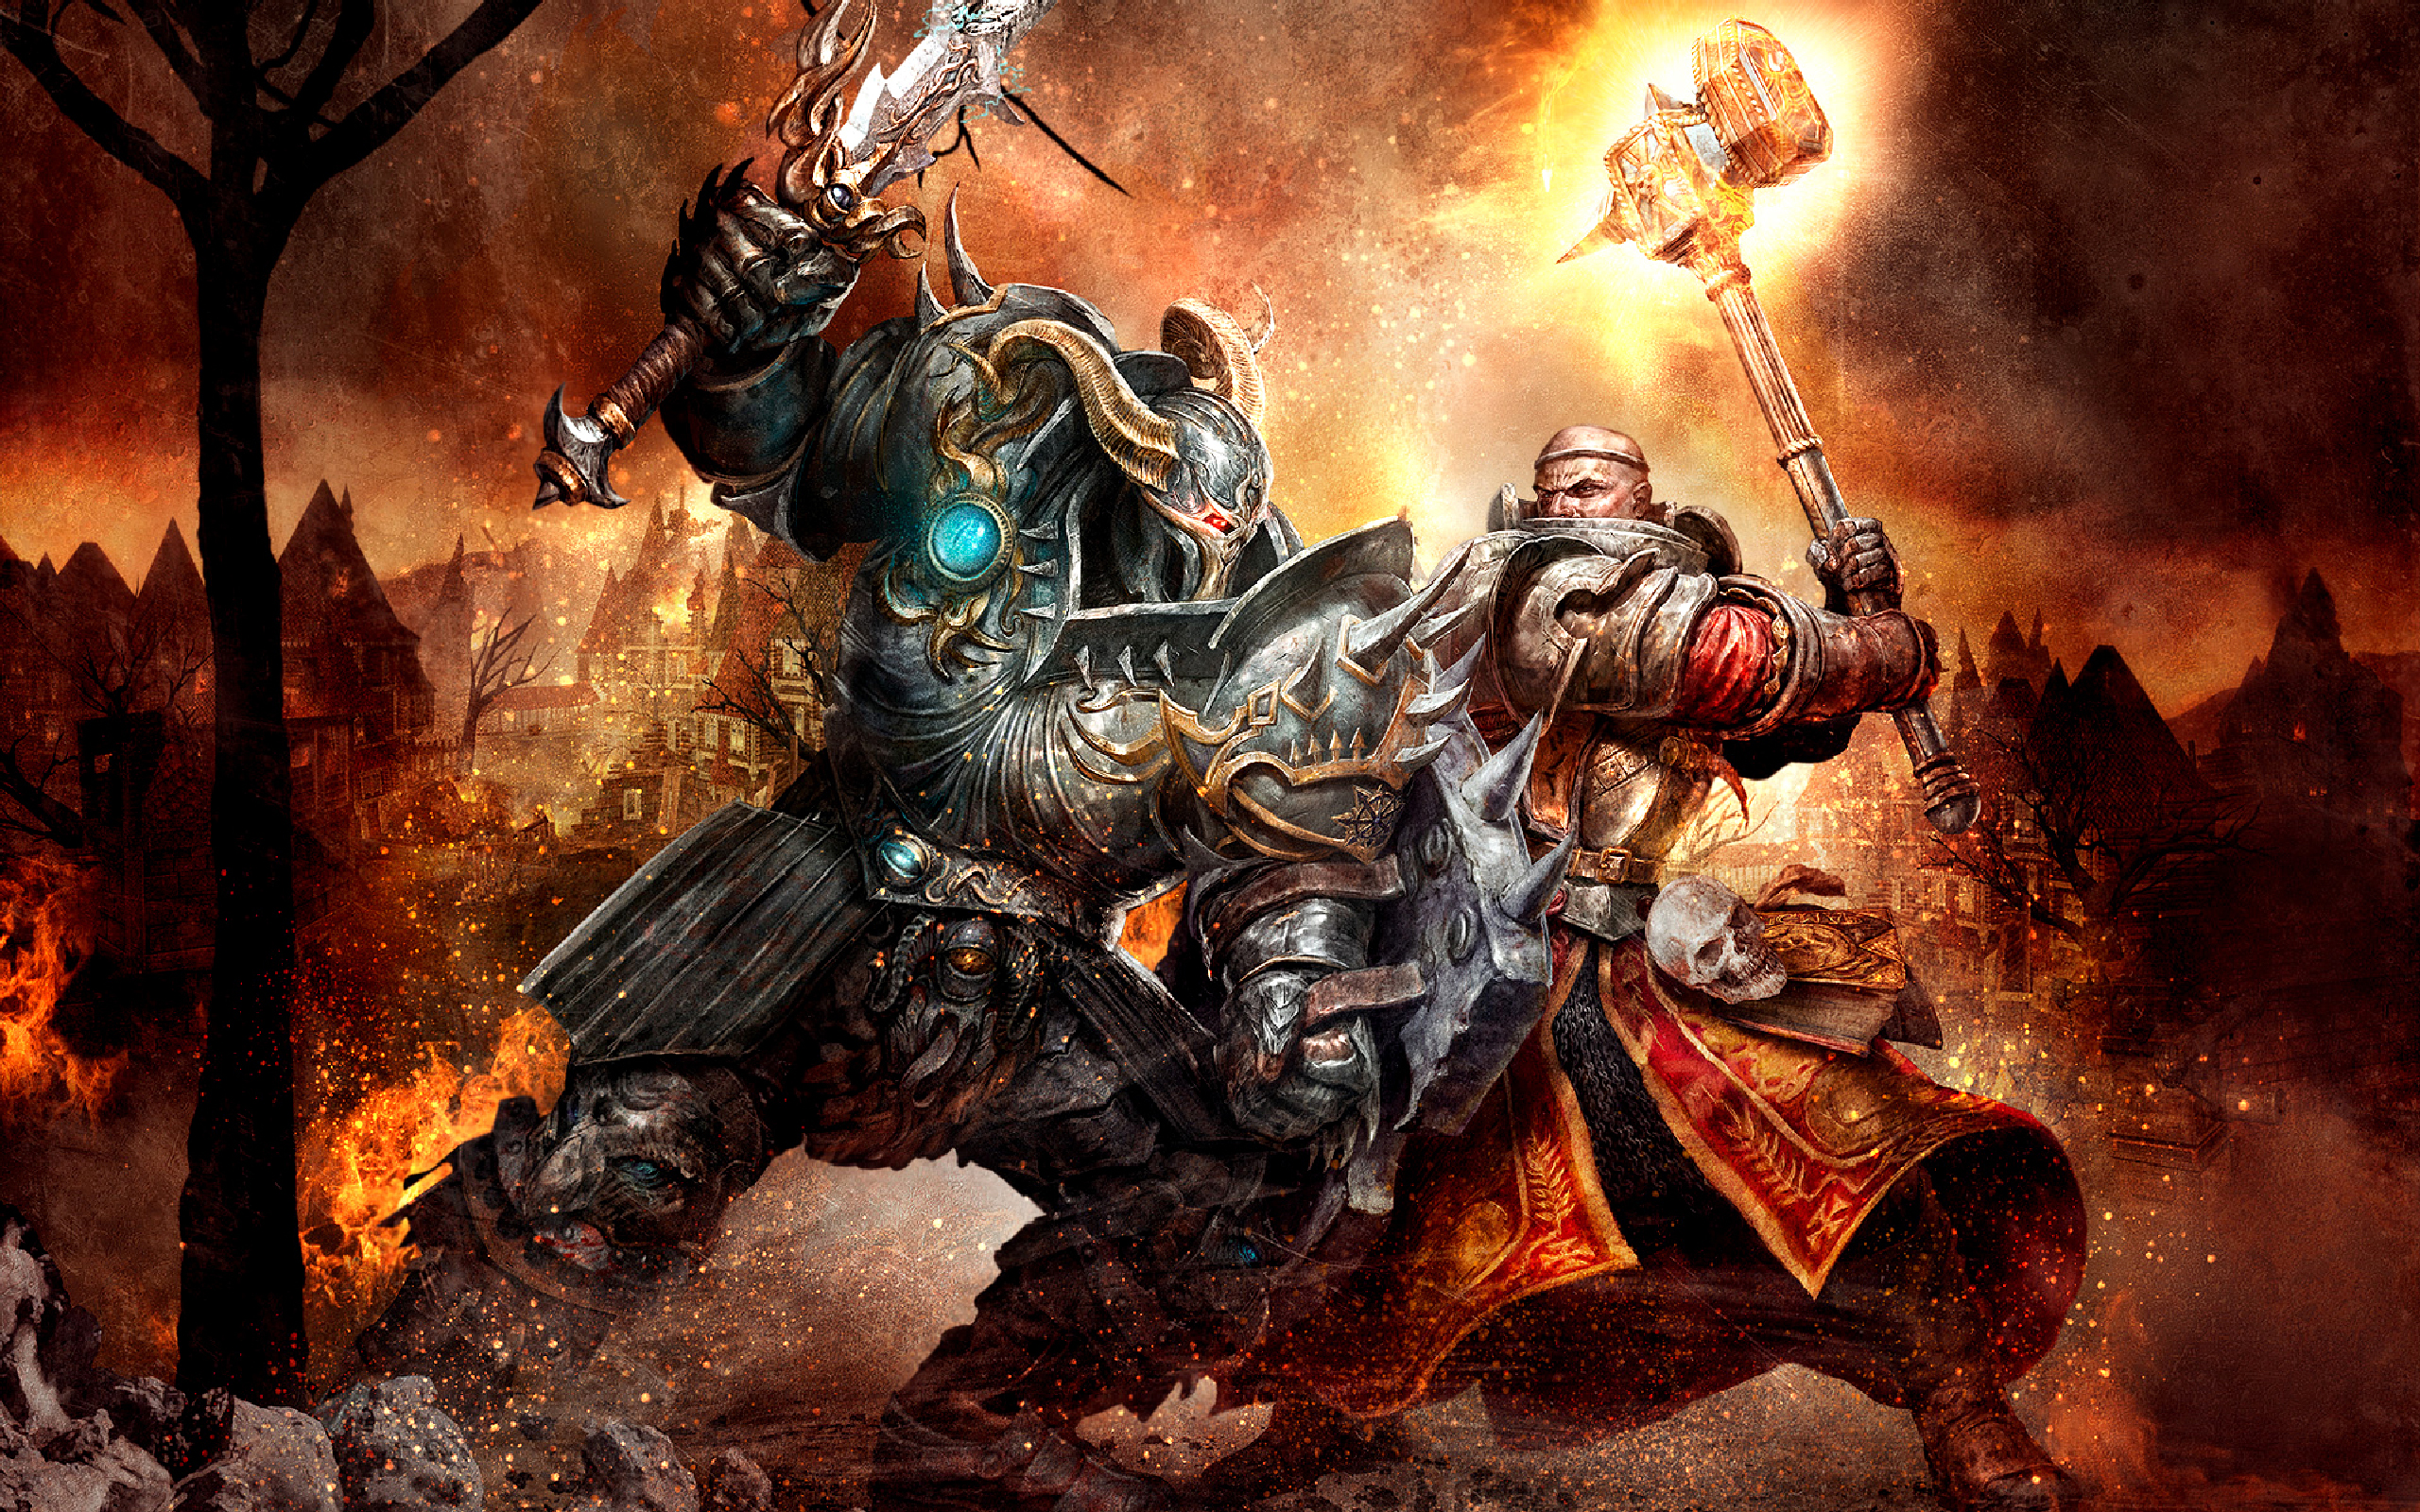 The untimely death of Warhammer Online, and the long road to resurrect